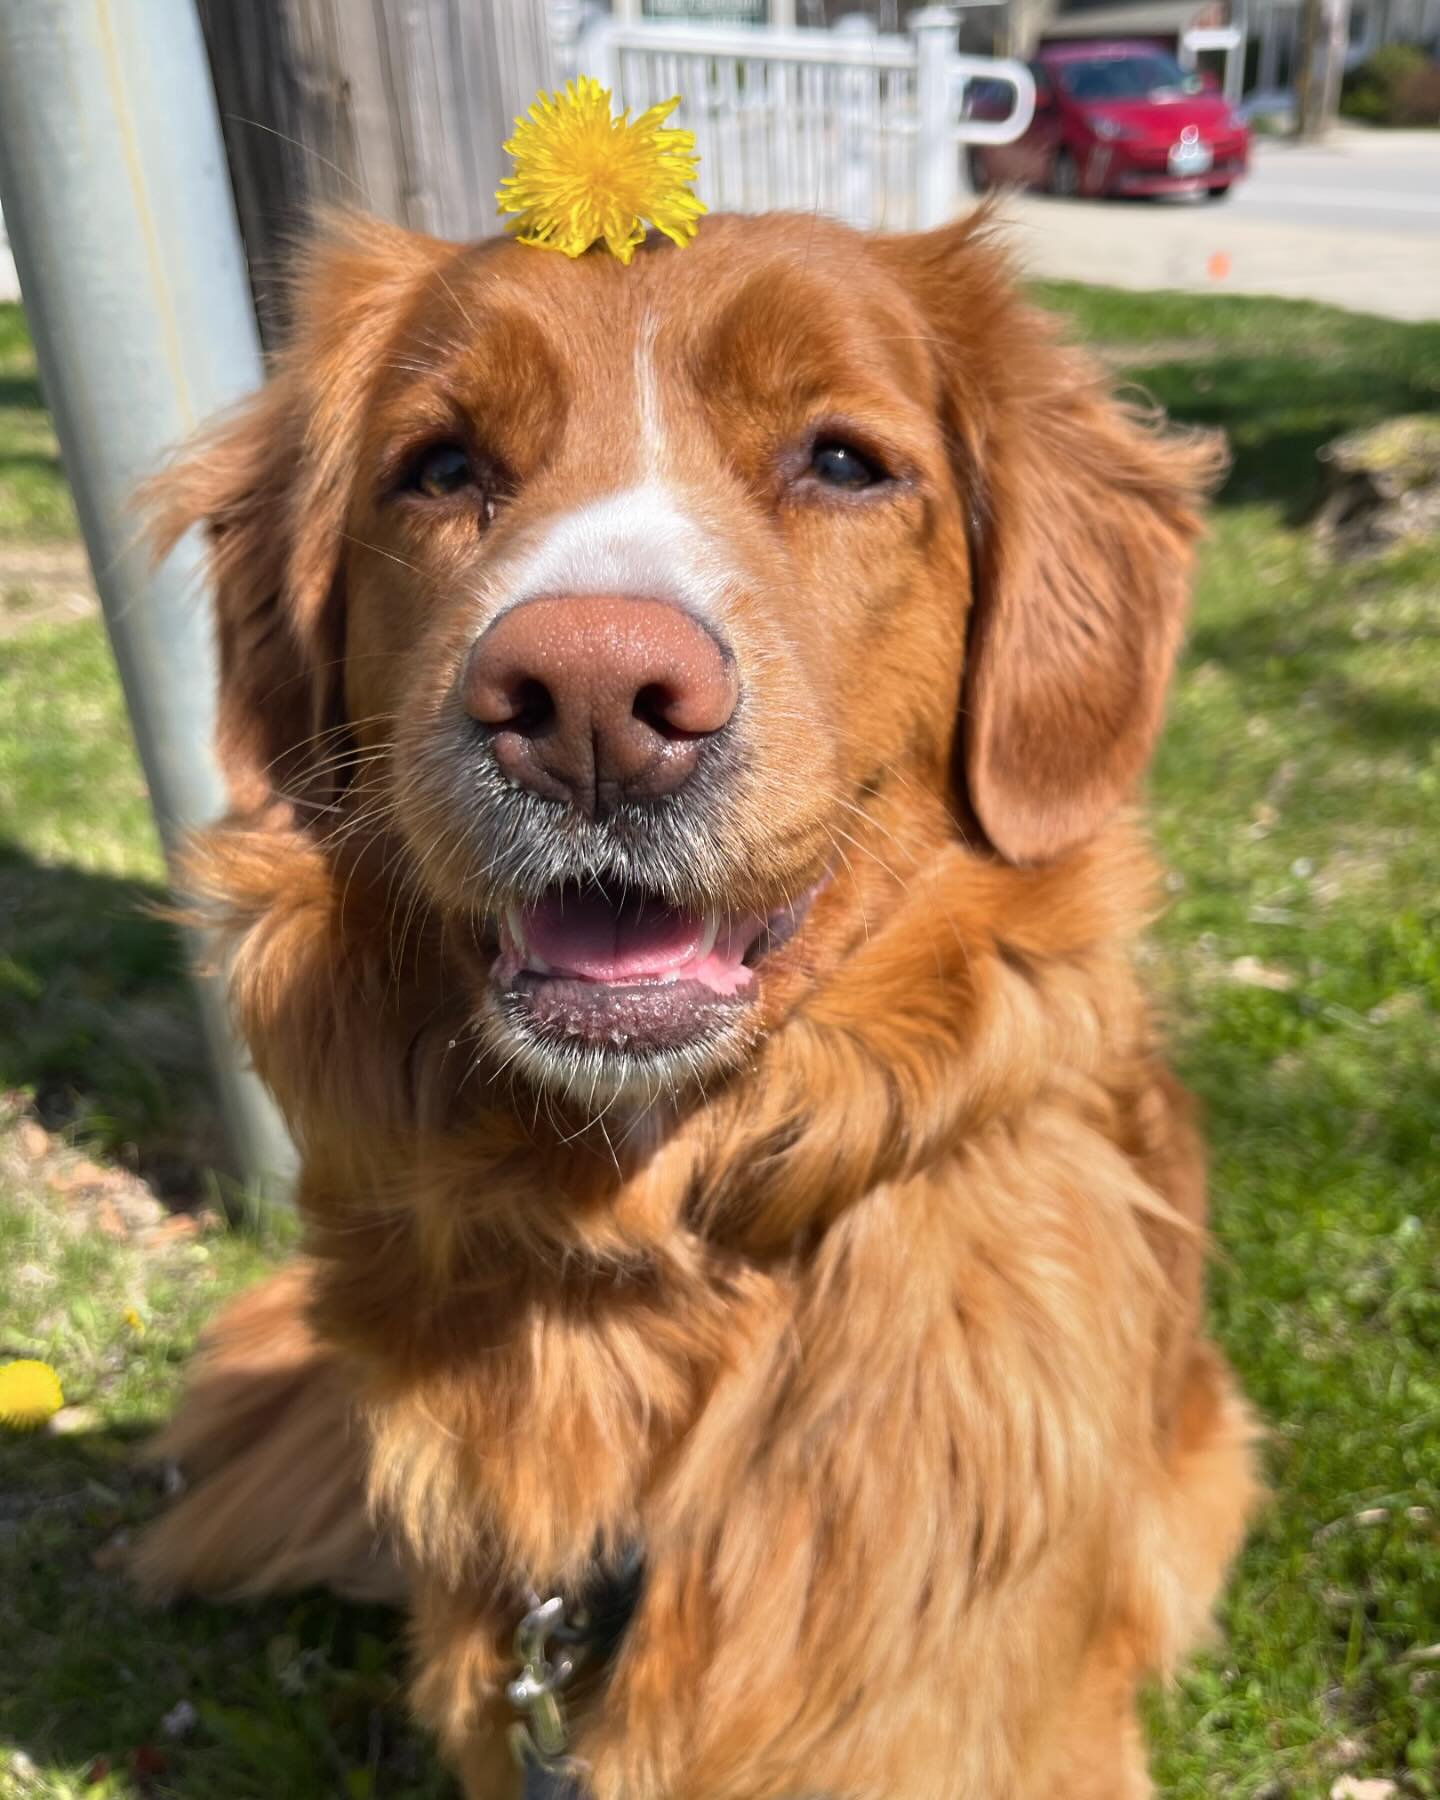 Spring has sprung&hellip;finally! 🌼 Enjoying every second of this sunny day with India! 🐾 

#ducktollingretriever #ducktoller #dogsofig #dogstagram #woof #dogoftheday #dovernh #petcare #petcareprofessional #entrepreneur #womenownedbusiness #support